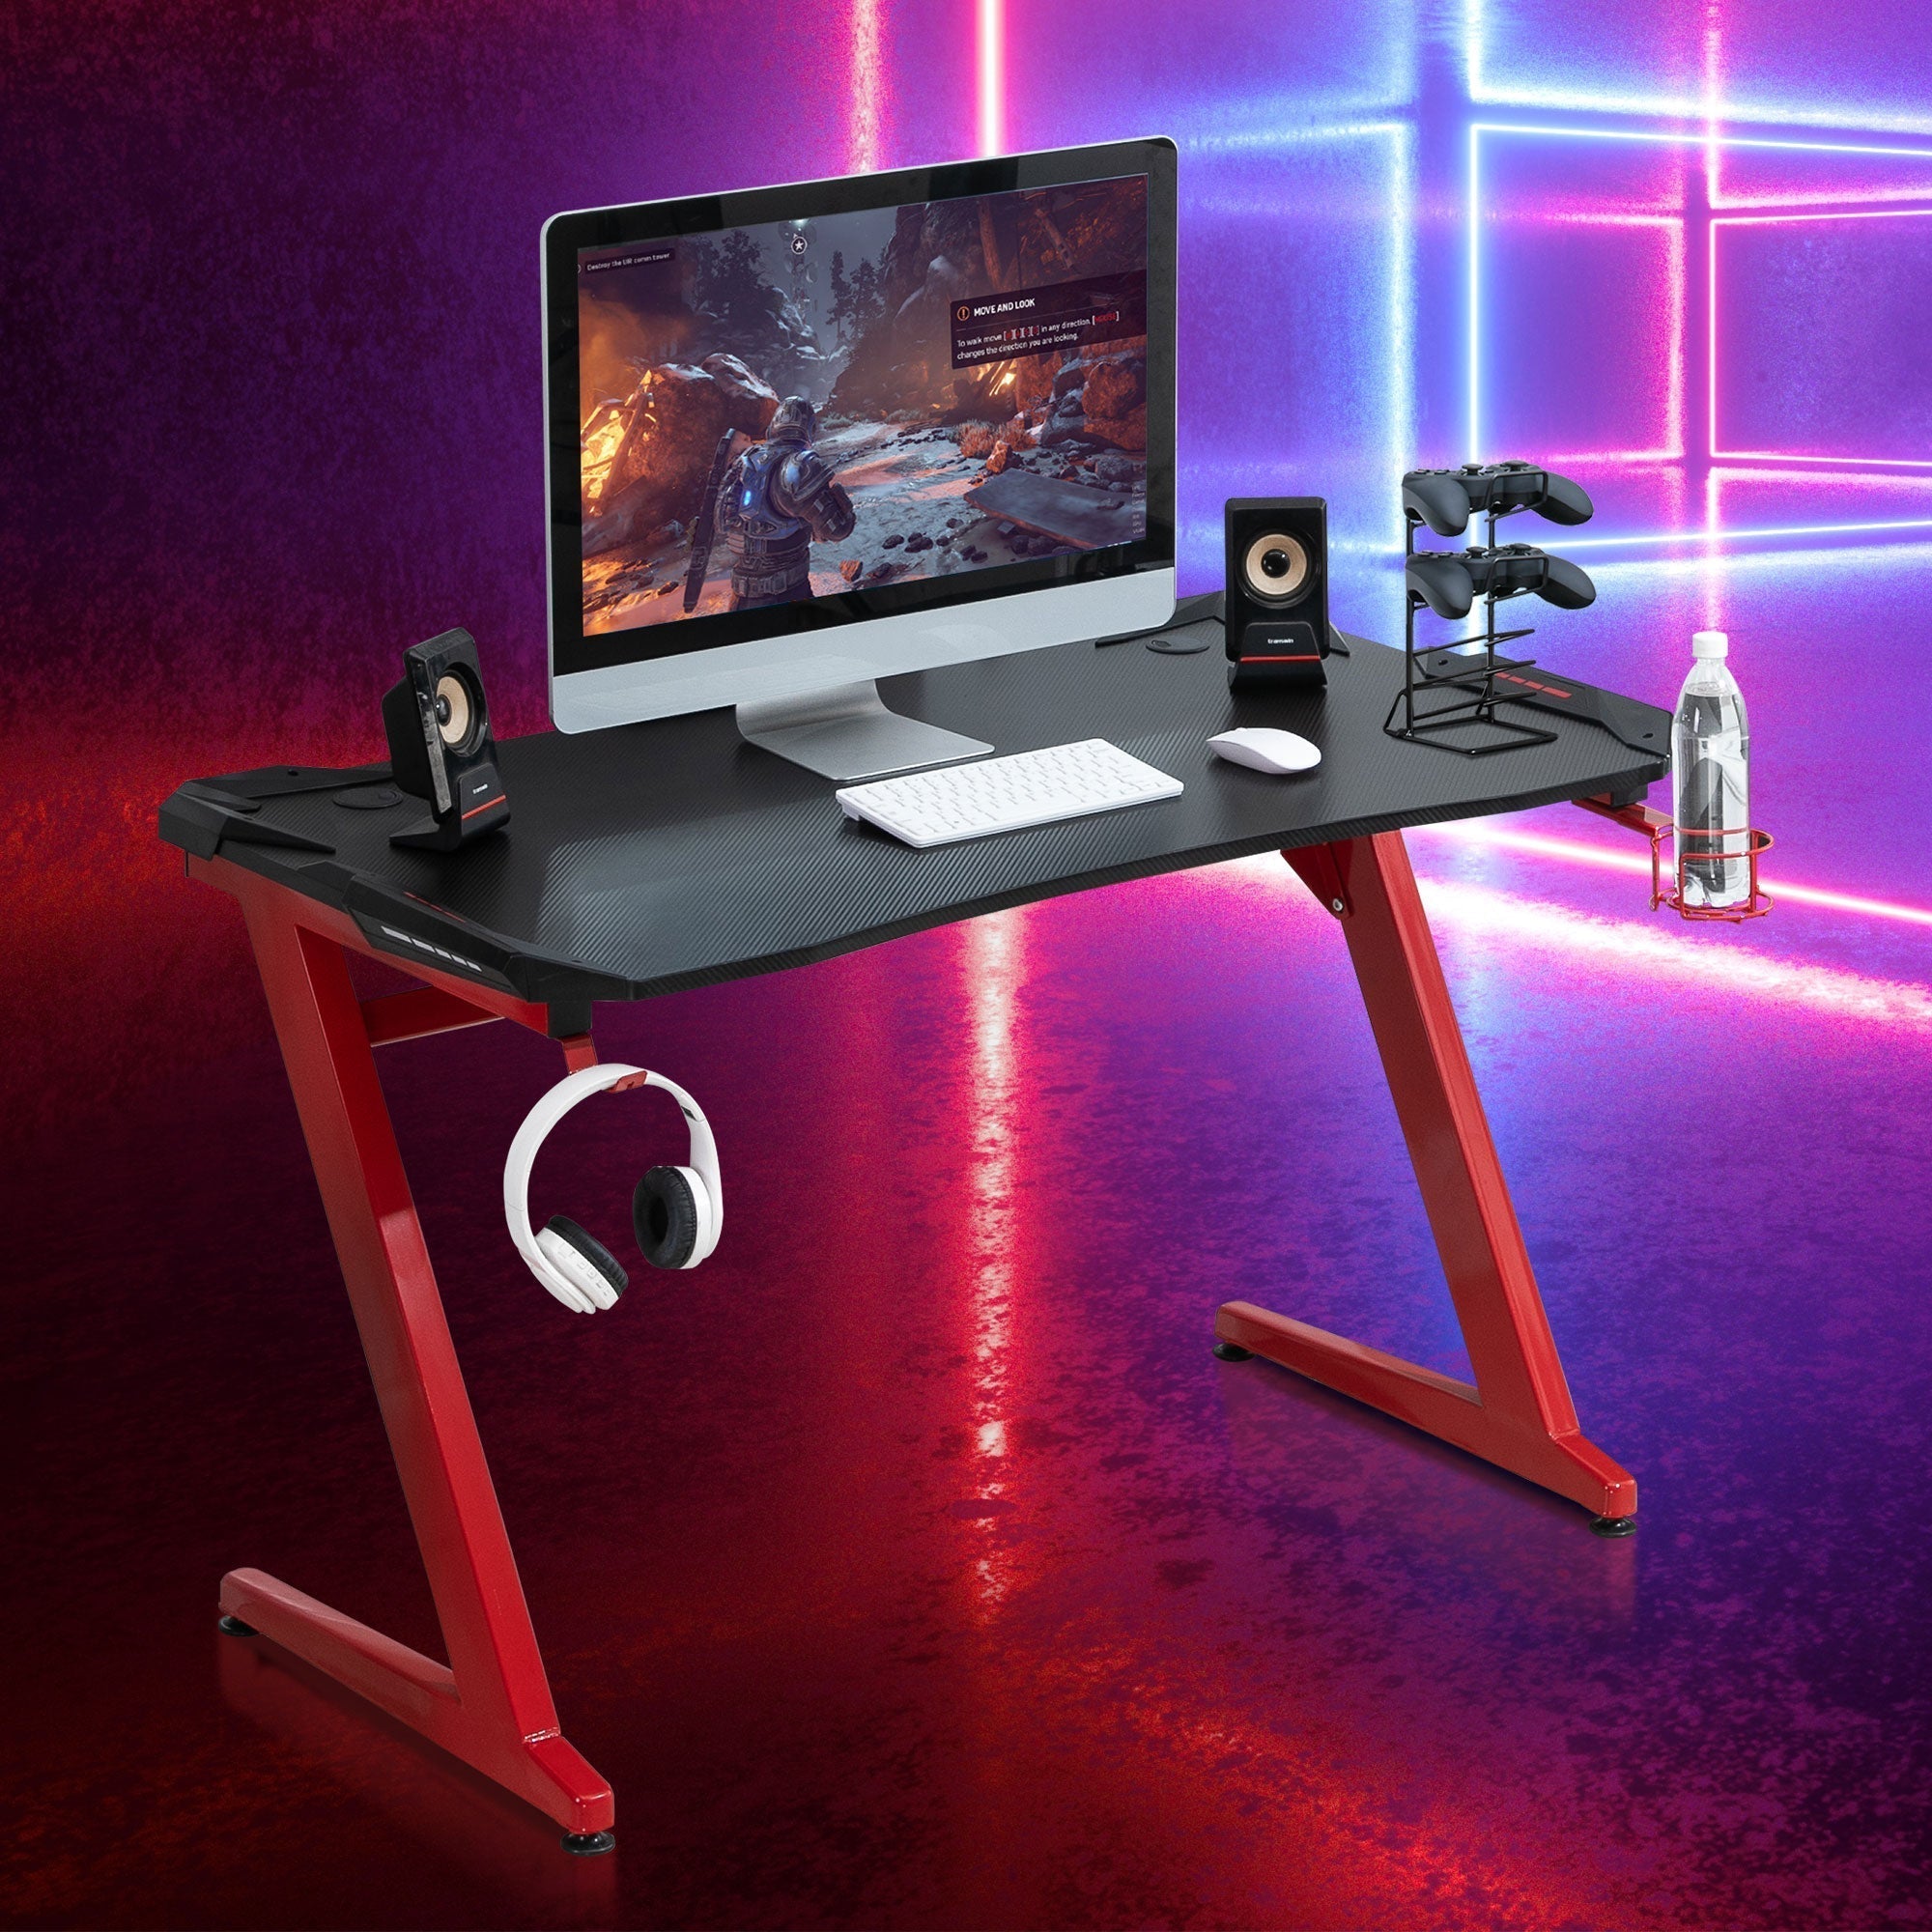 Maplin Plus Gaming Desk with Cup Holder, Headphone Hook & Cable Management - maplin.co.uk